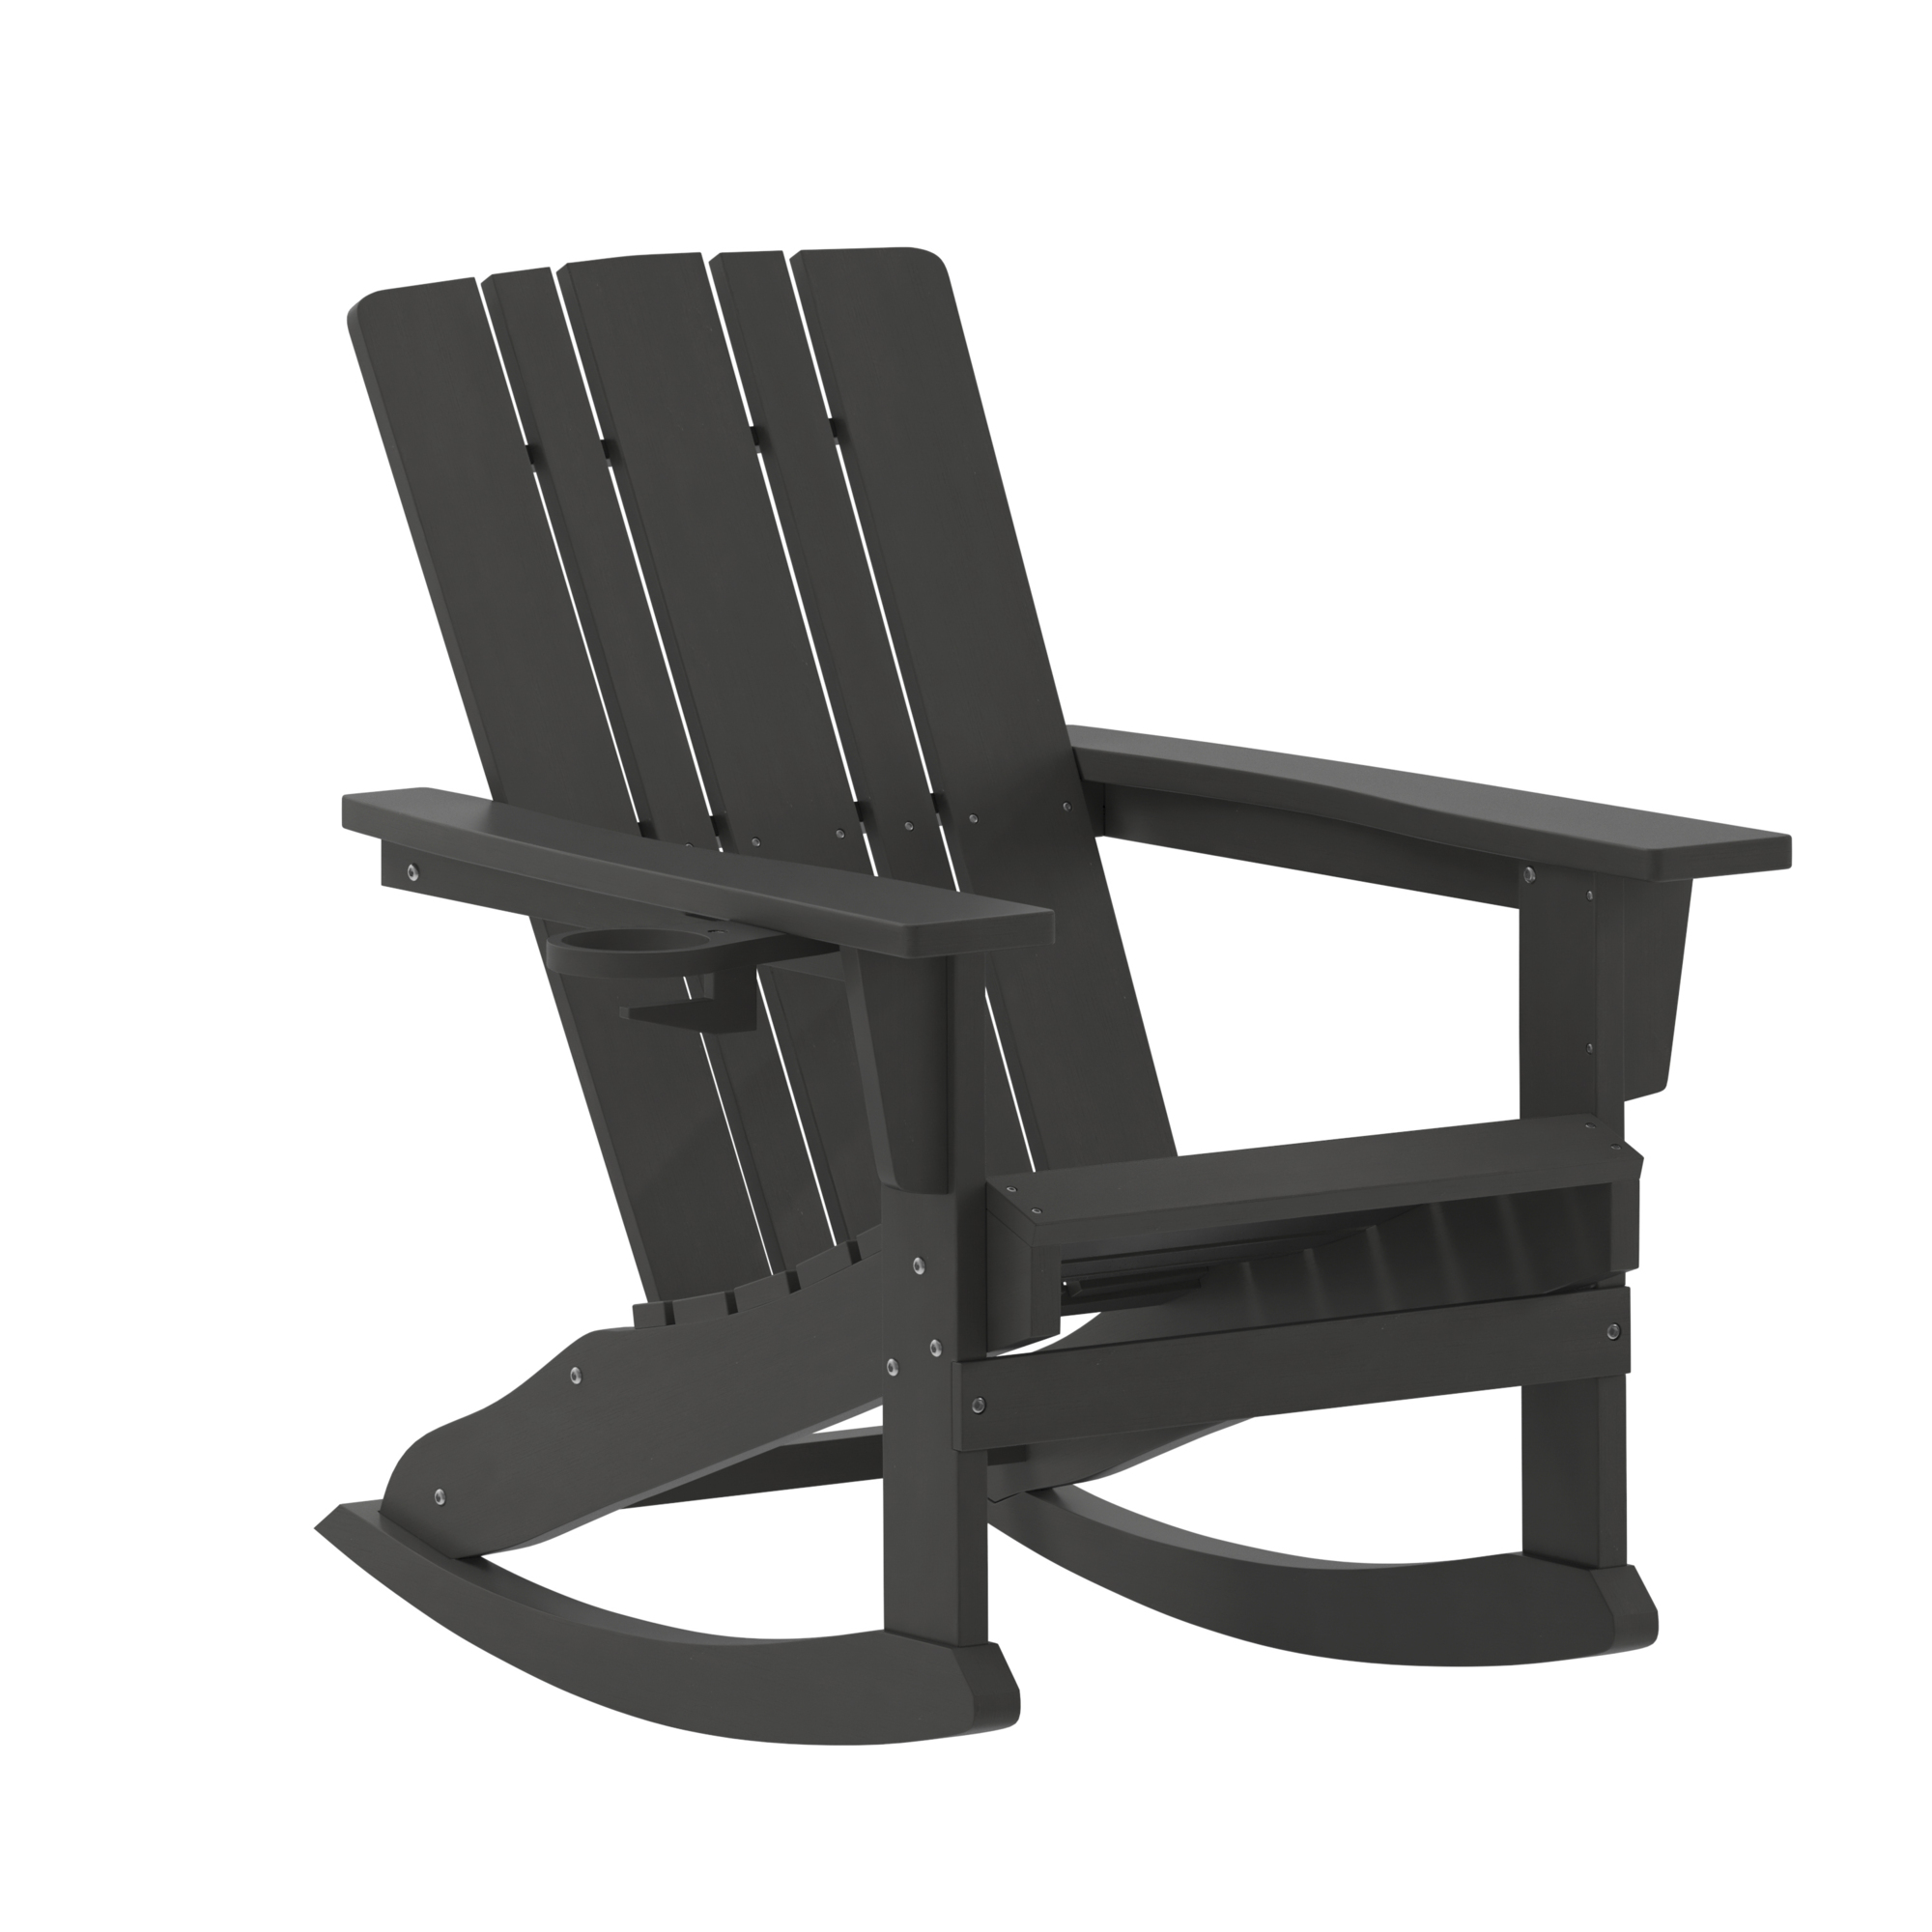 Flash Furniture, Black Adirondack Rocking Chair with Cupholder, Primary Color Black, Material HDPE, Width 33.5 in, Model LEHMP104531BK